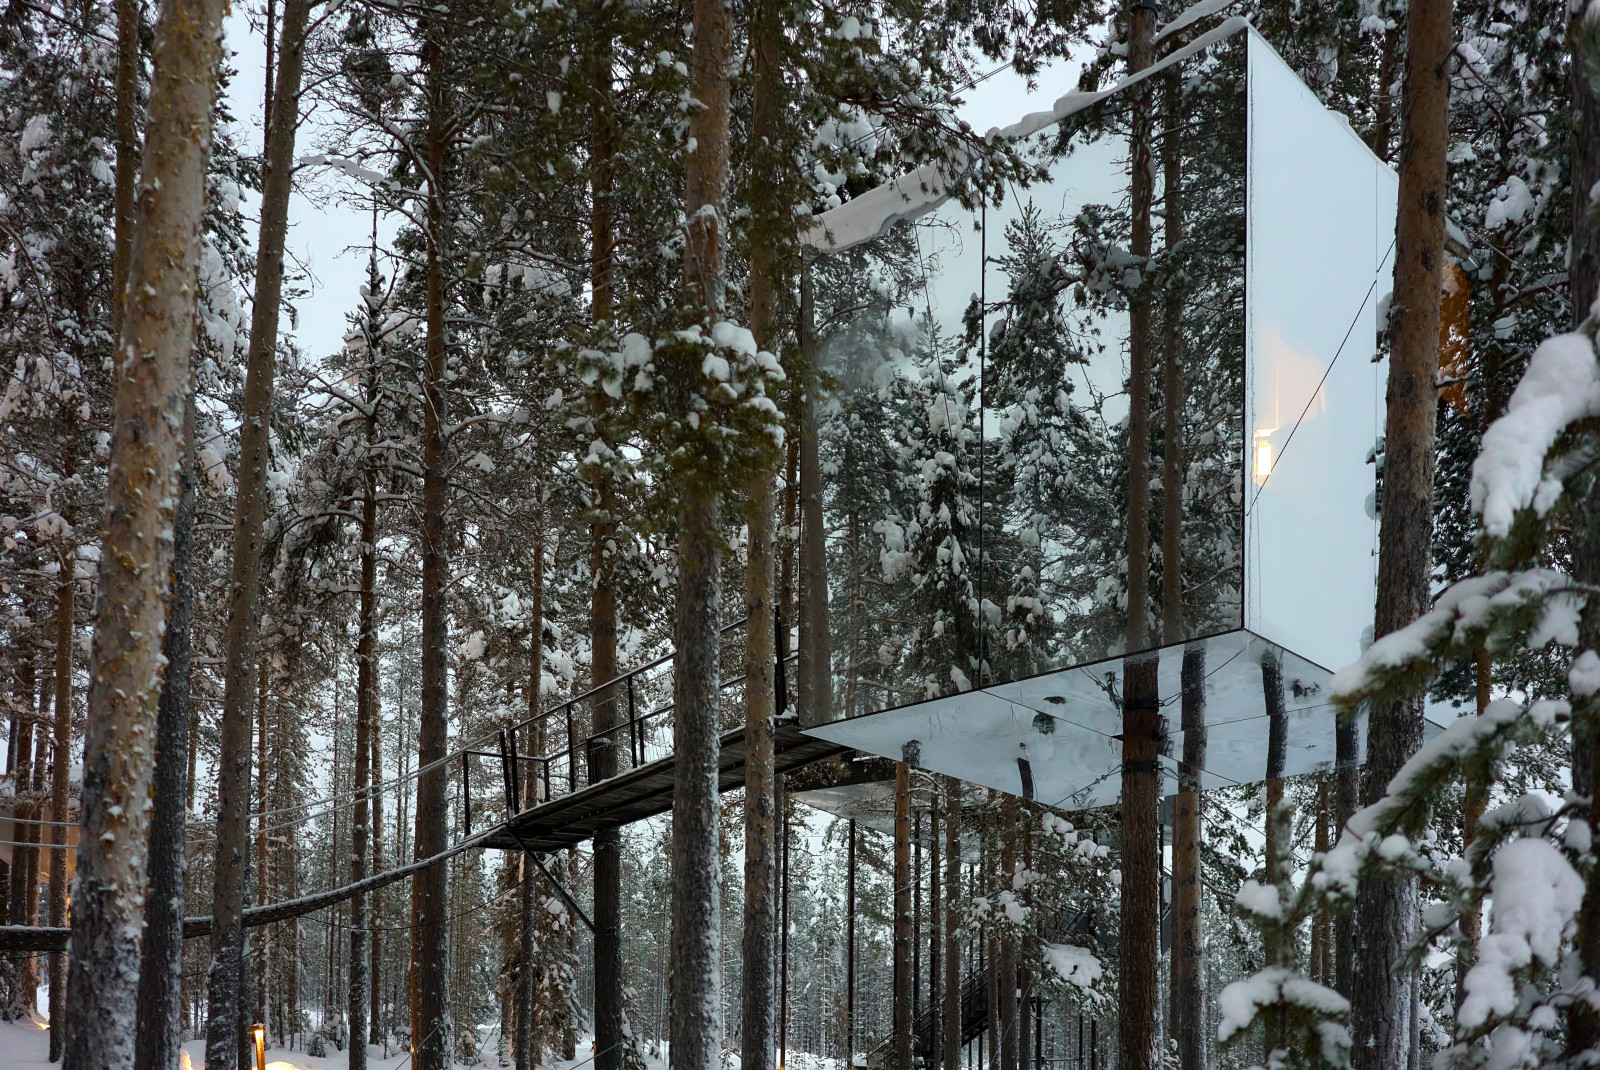 treehouses covered in snow